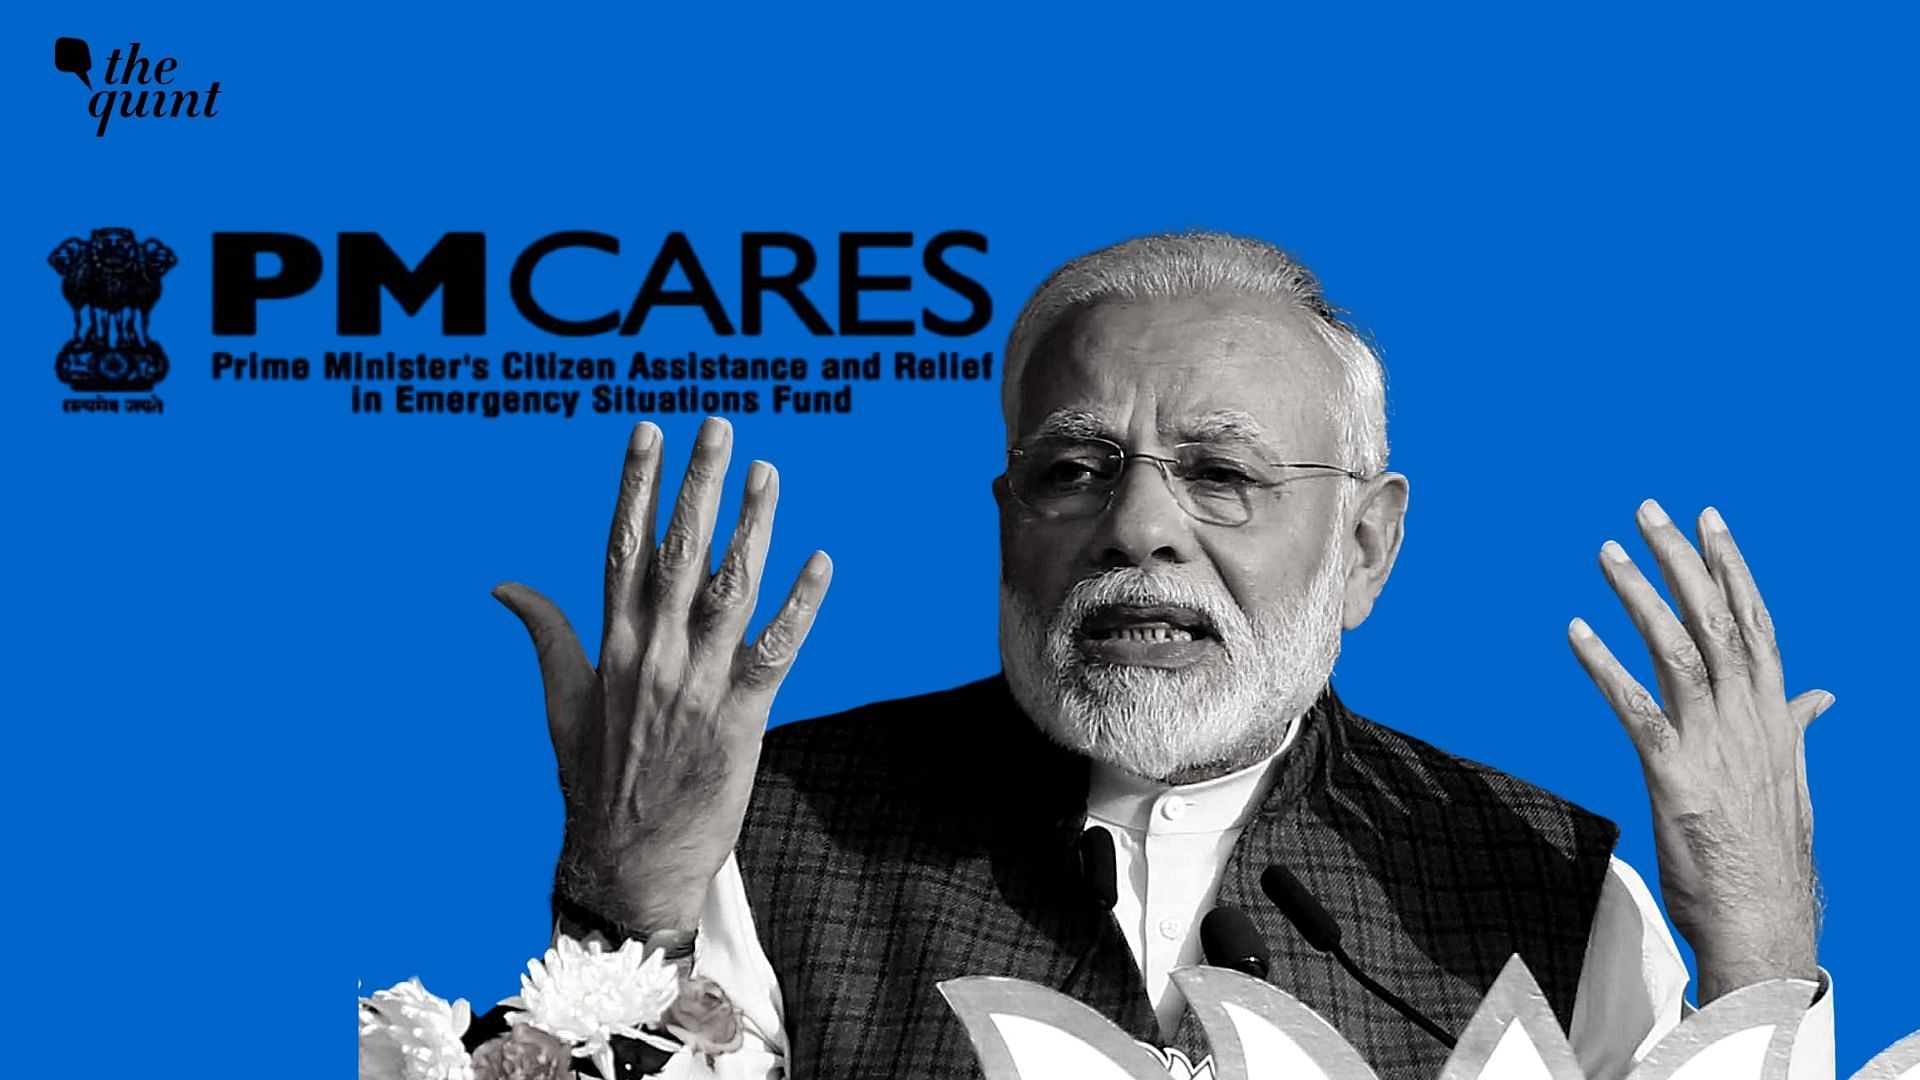 In late March, PM Modi had announced the formation of a special fund to address the emergency situation caused by the COVID-19 pandemic, called PM CARES.